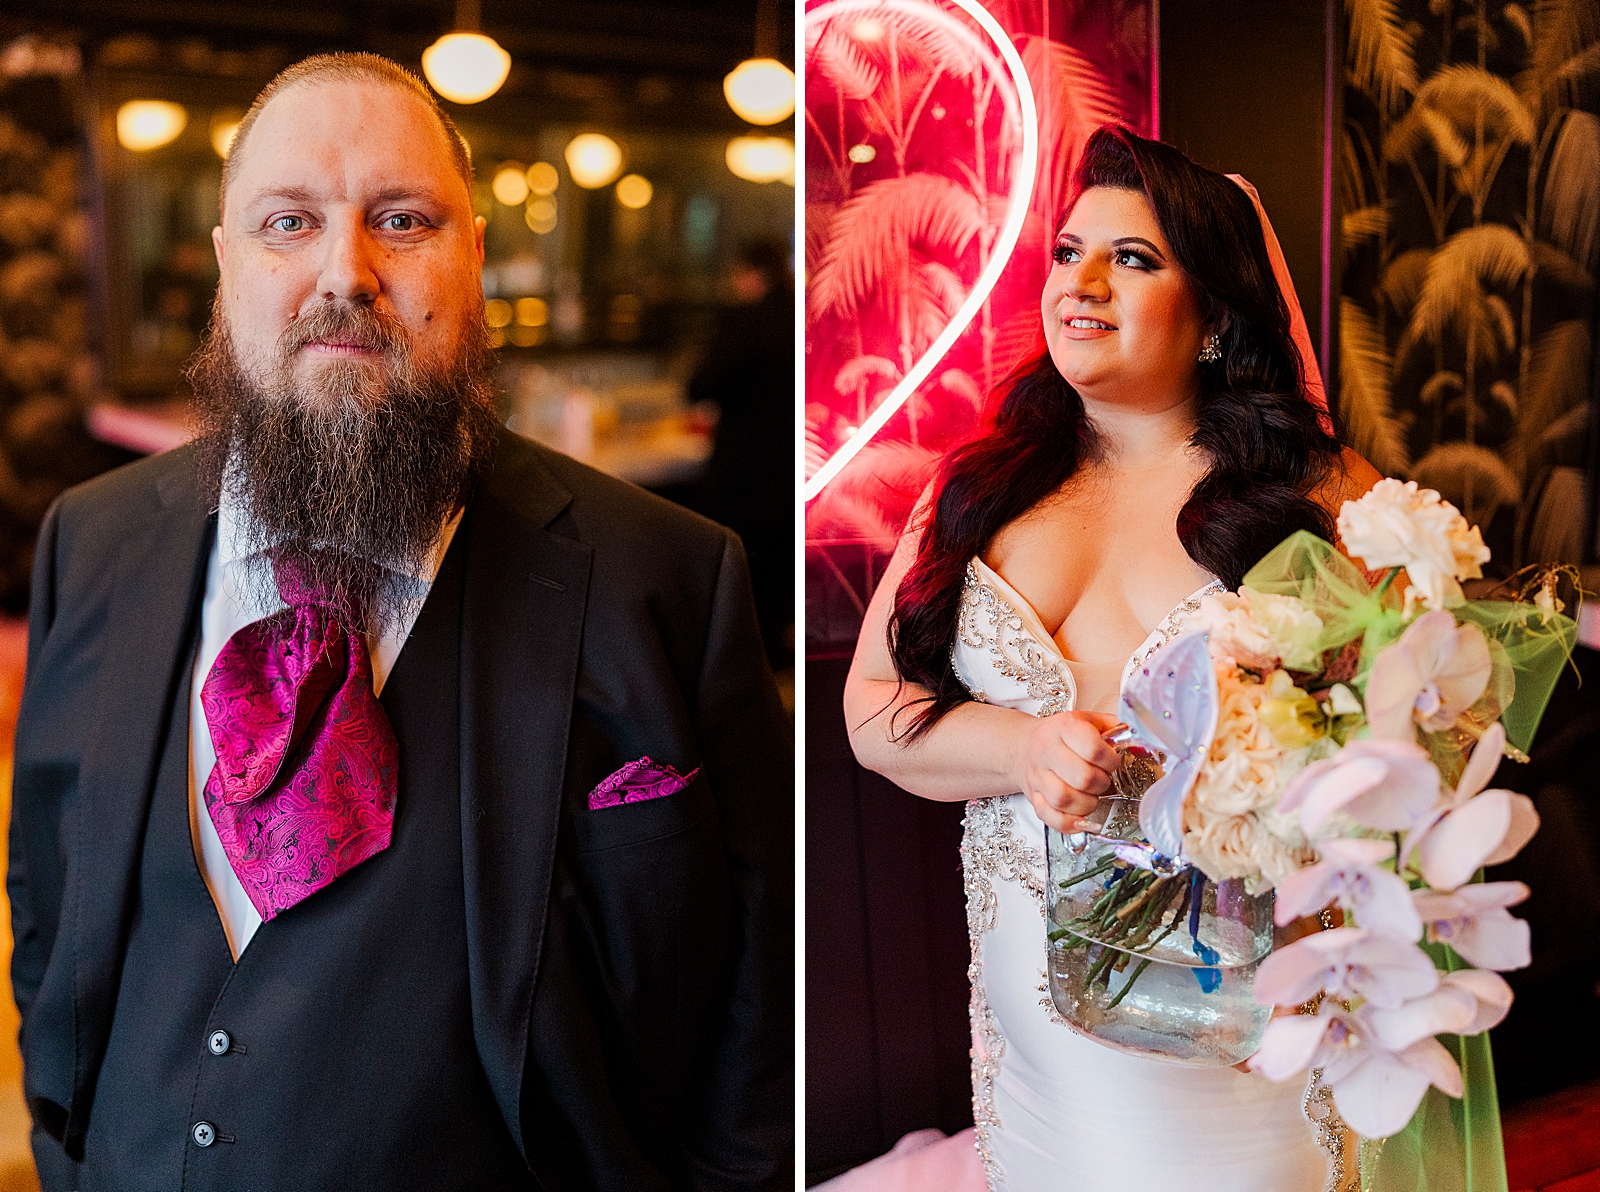 Left photo: Up close shot of the groom.
Right photo: Upper body shot of the bride holding her bouquet as she stands in front of a pink florescent light heart sign.